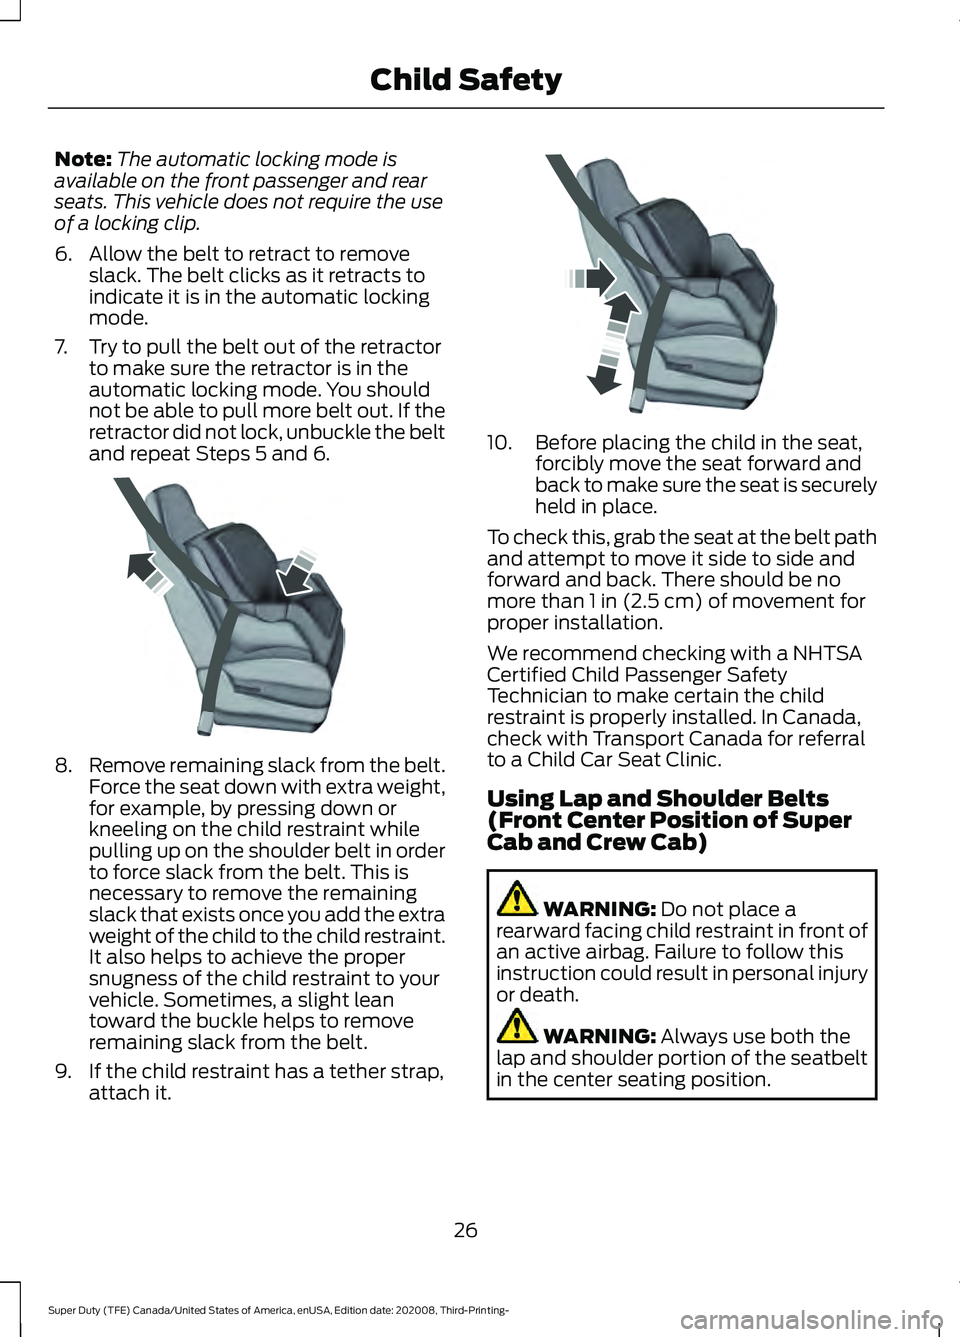 FORD F-450 2021  Owners Manual Note:
The automatic locking mode is
available on the front passenger and rear
seats. This vehicle does not require the use
of a locking clip.
6. Allow the belt to retract to remove slack. The belt cli